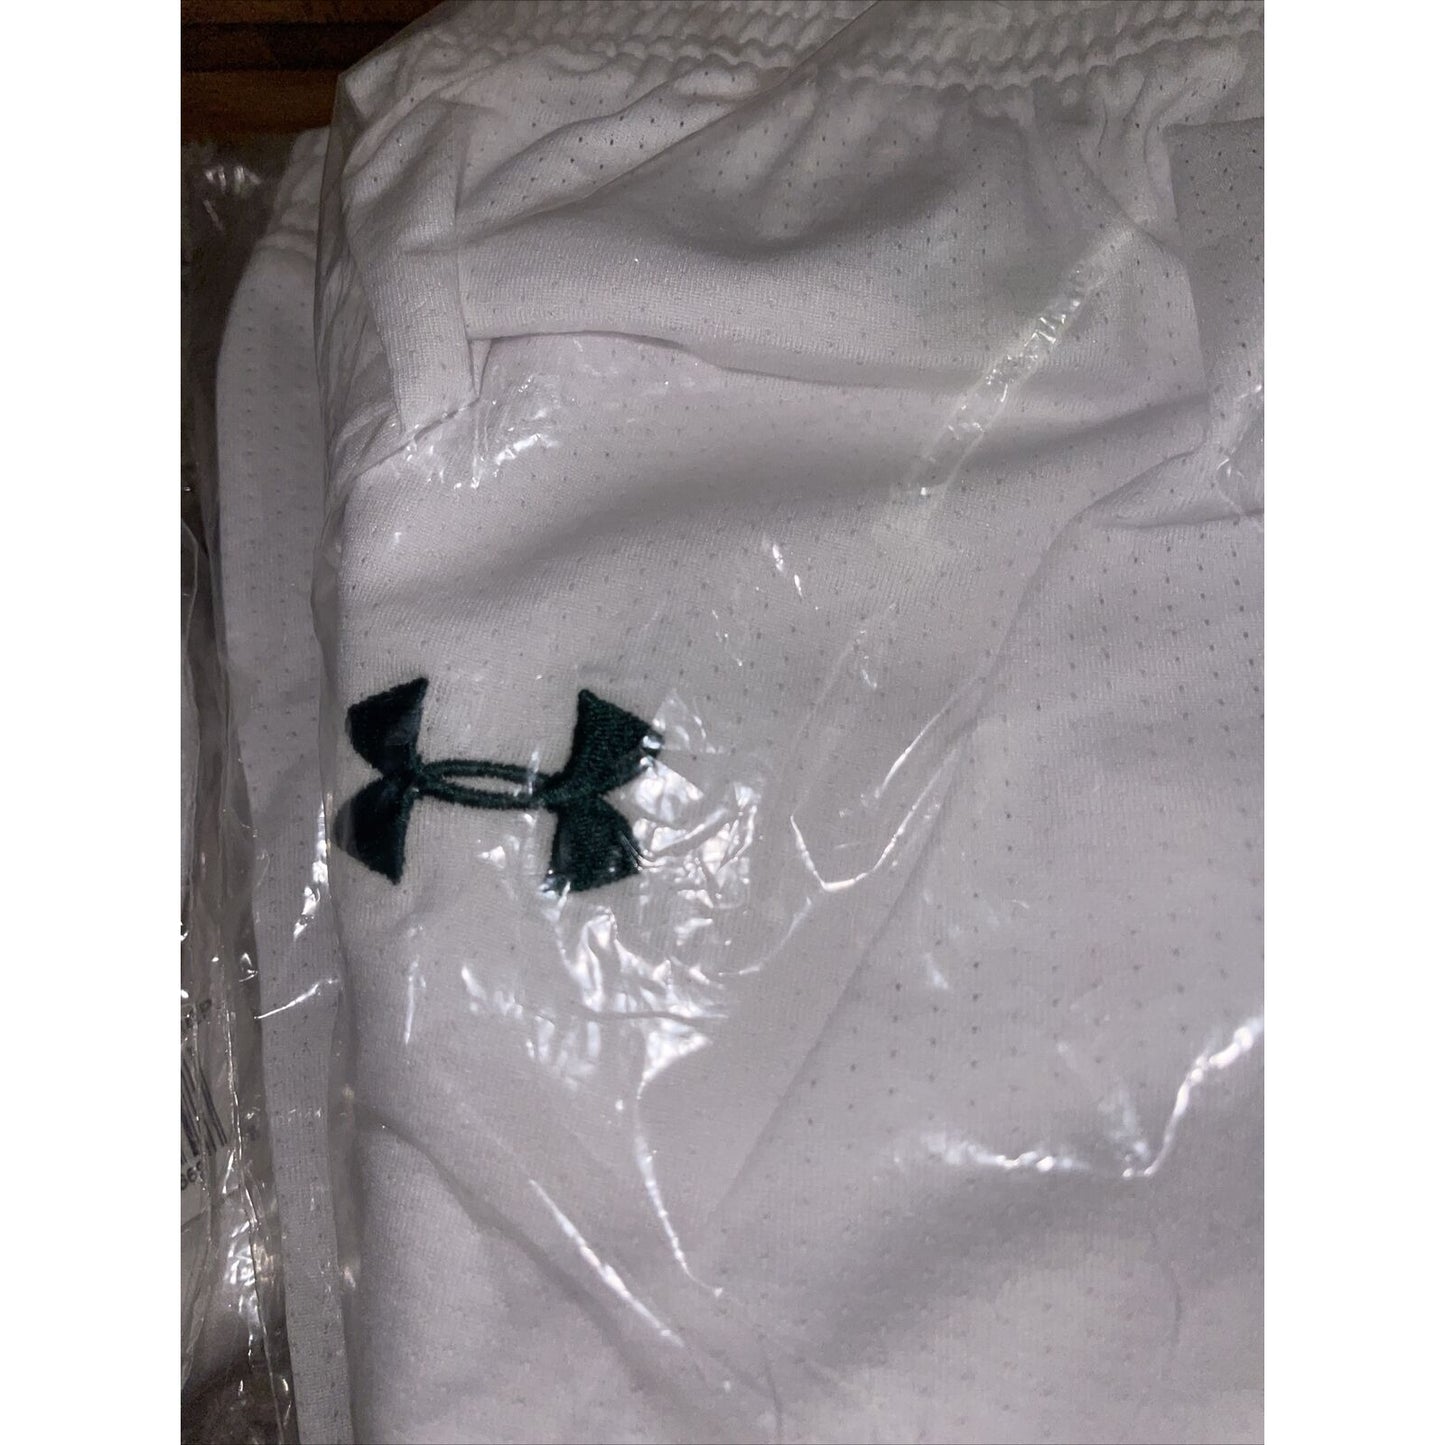 Boy's under armour Youth Large white and Green Lacrosse style shorts no pockets